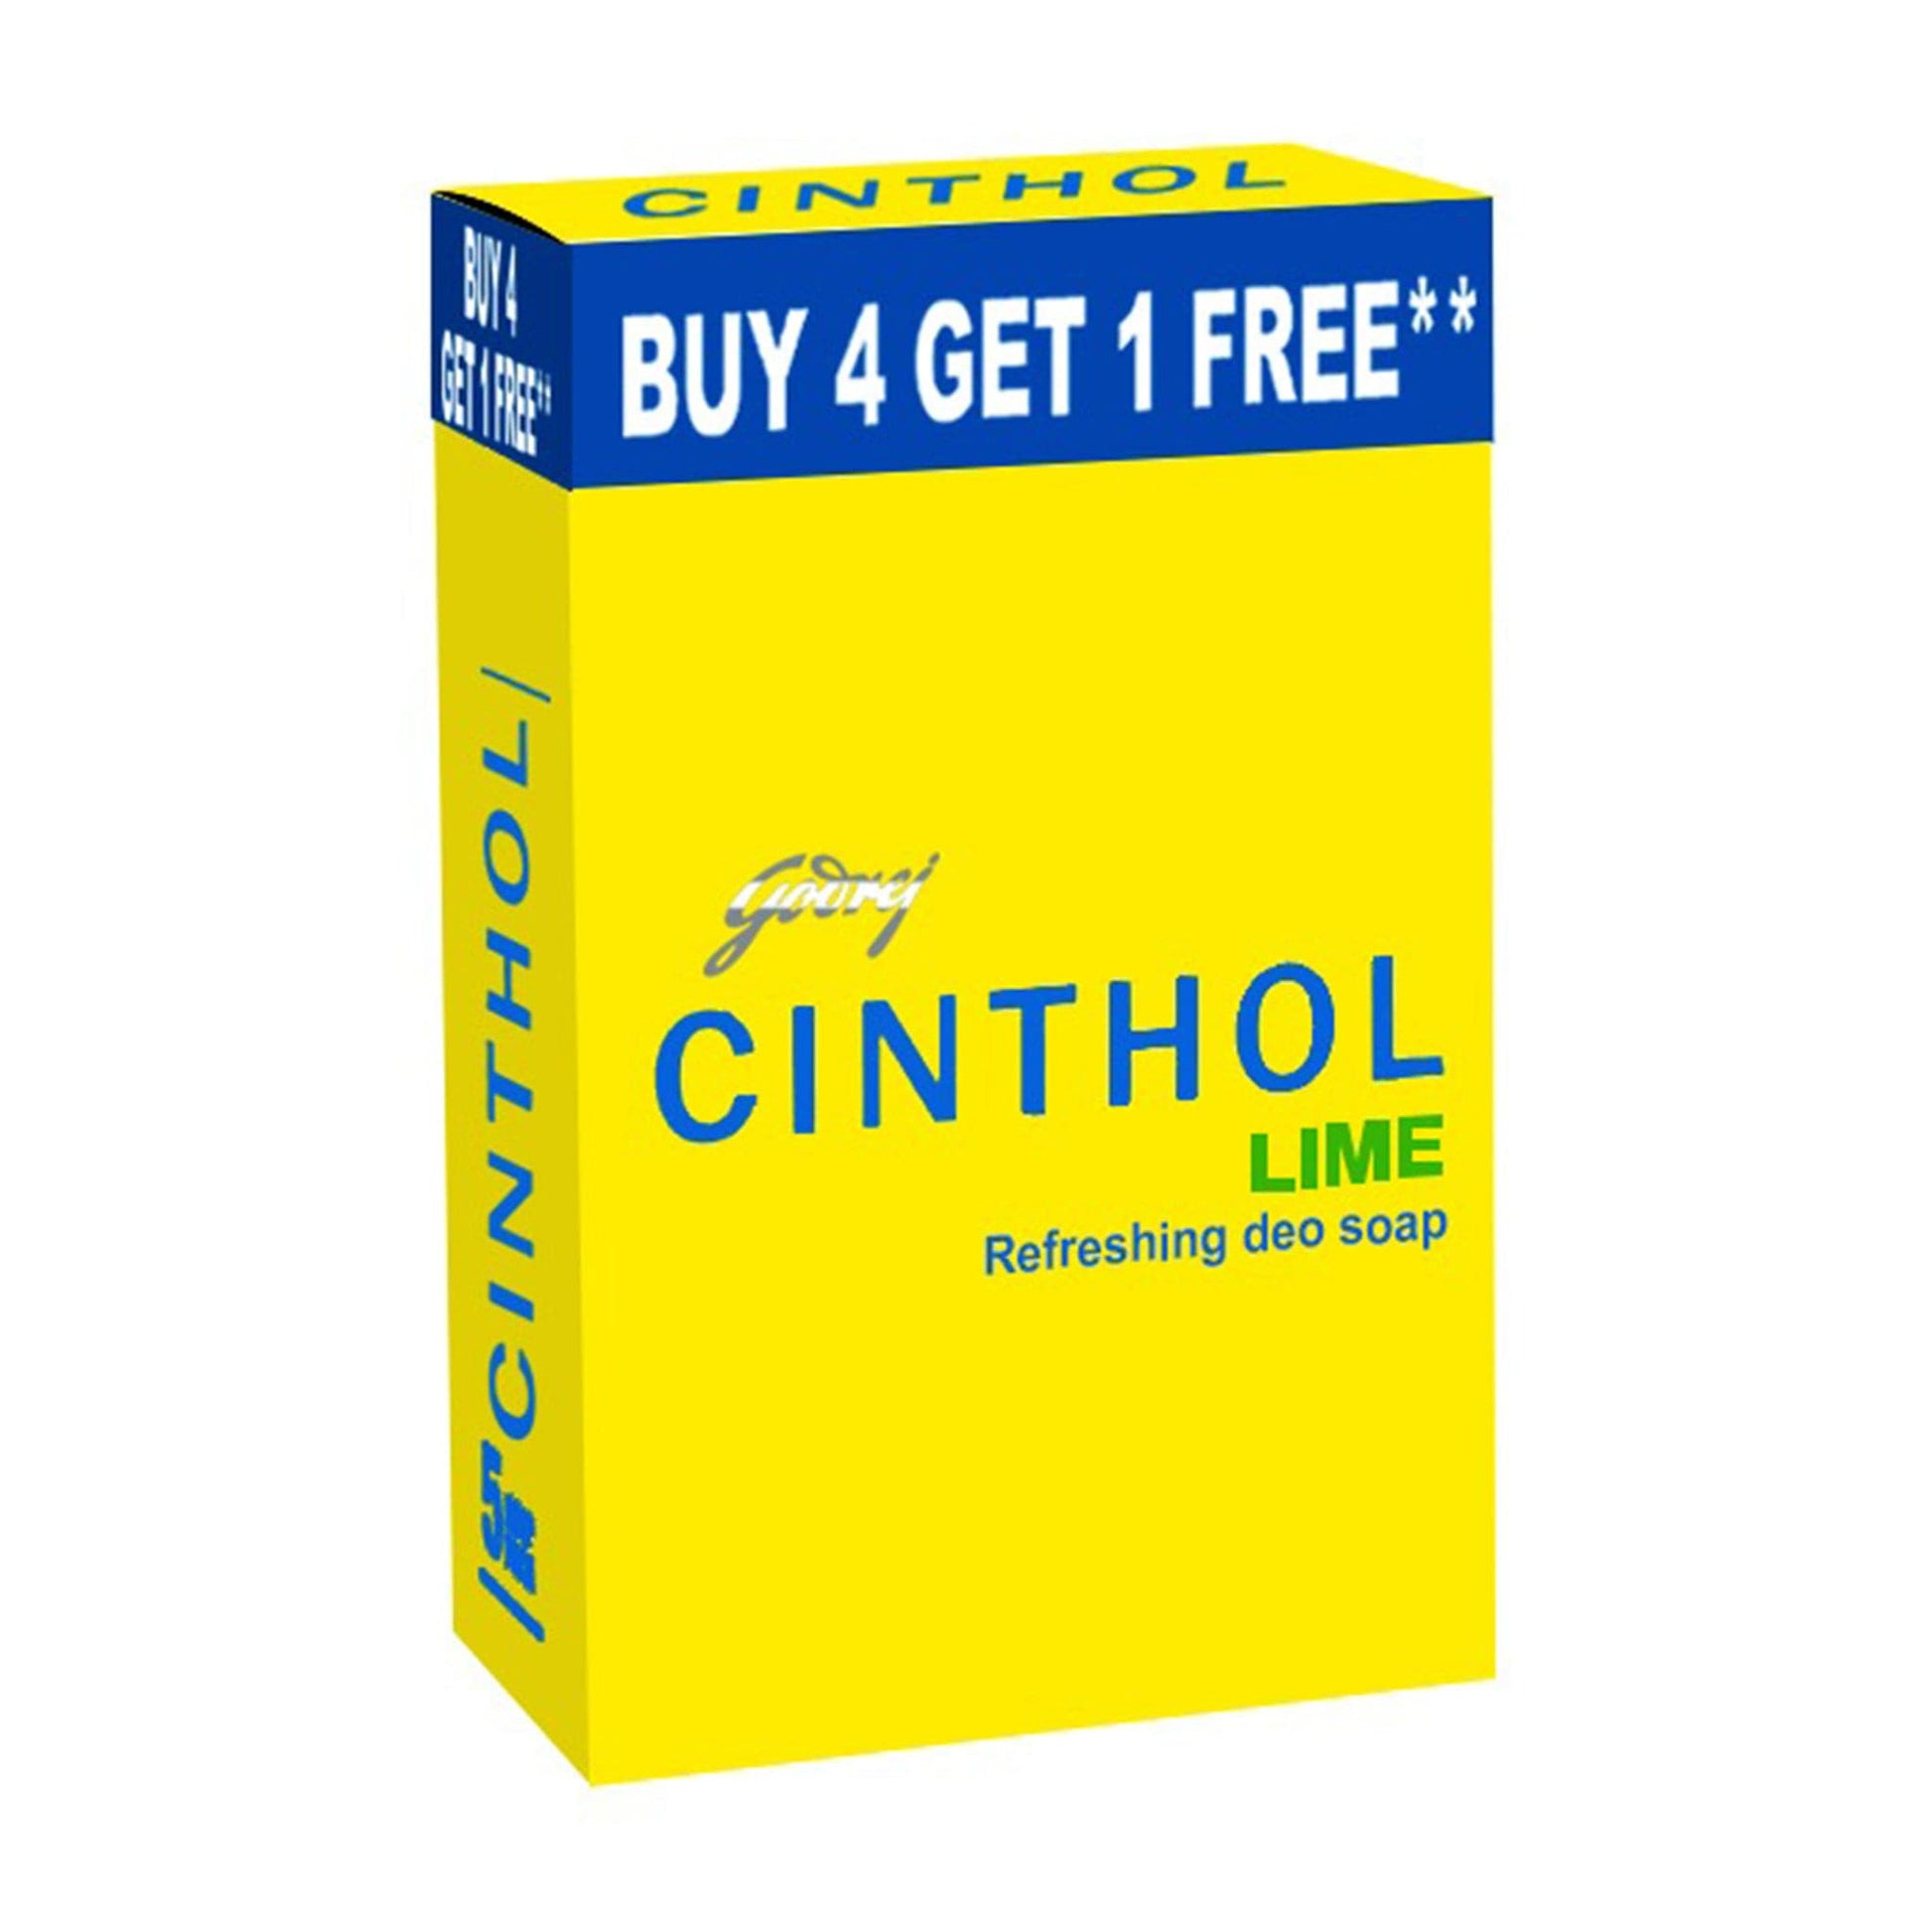 Cinthol Lime Refreshing Deo Soap.